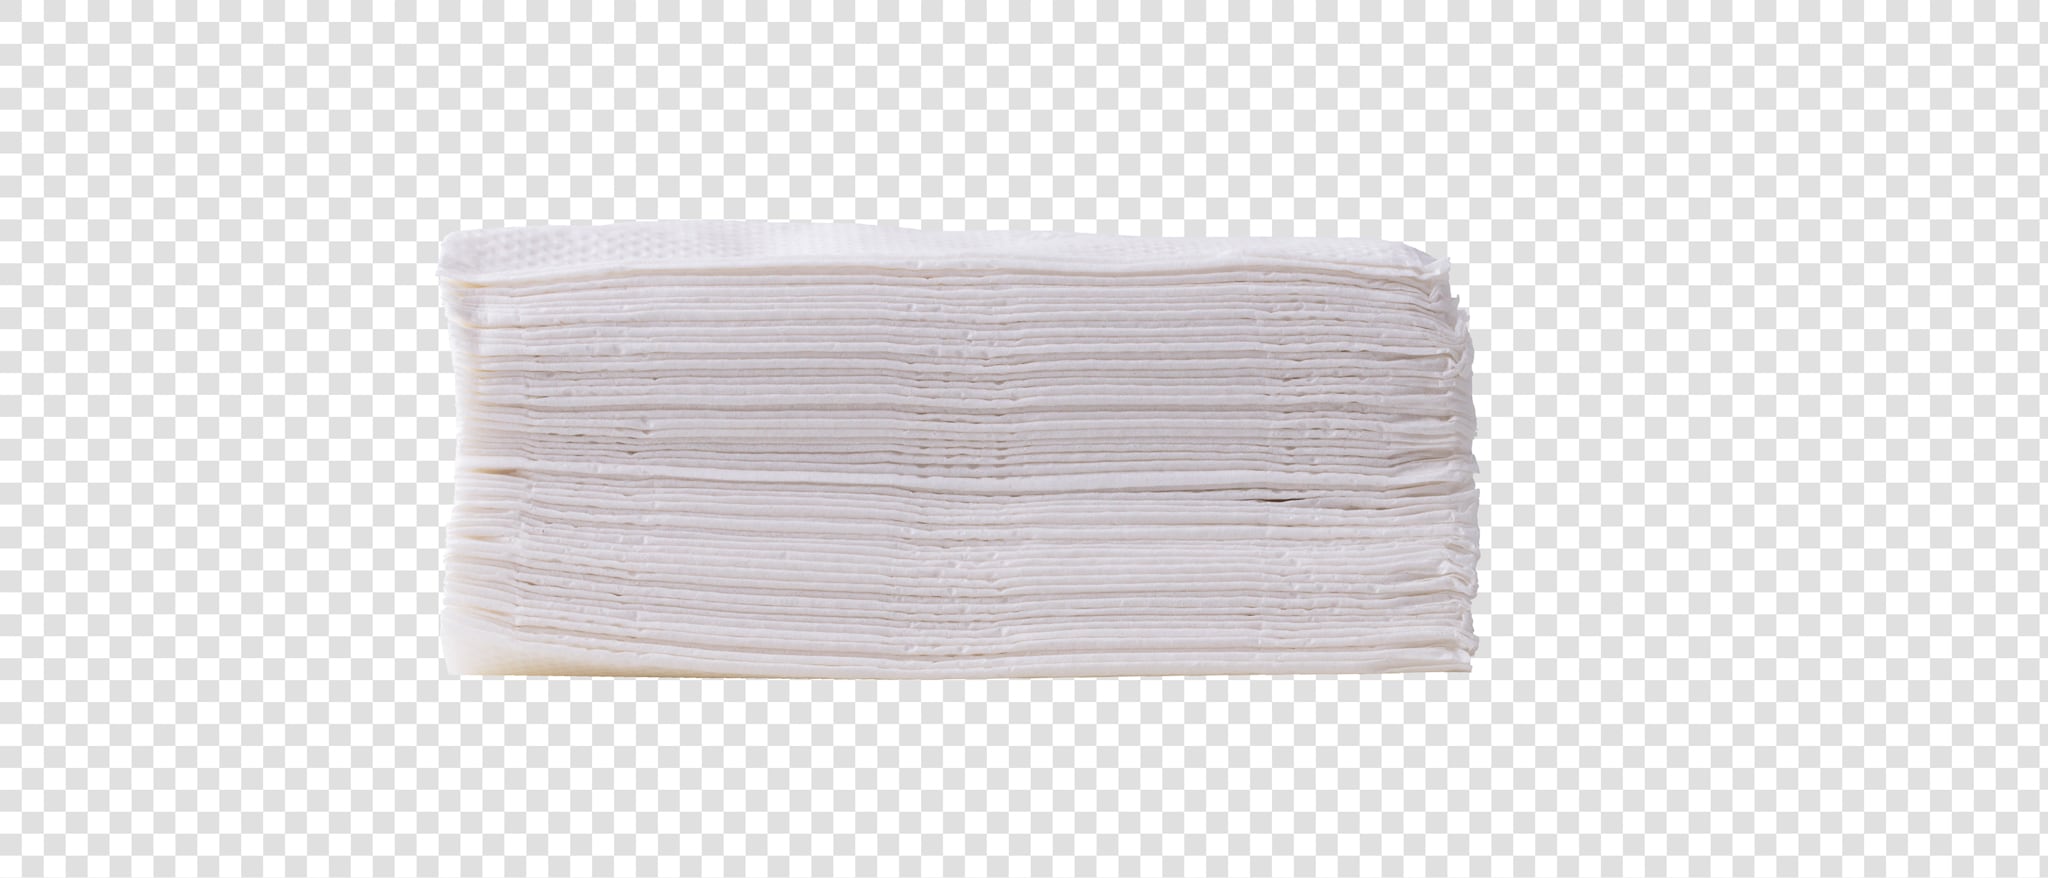 Napkin PSD image with transparent background